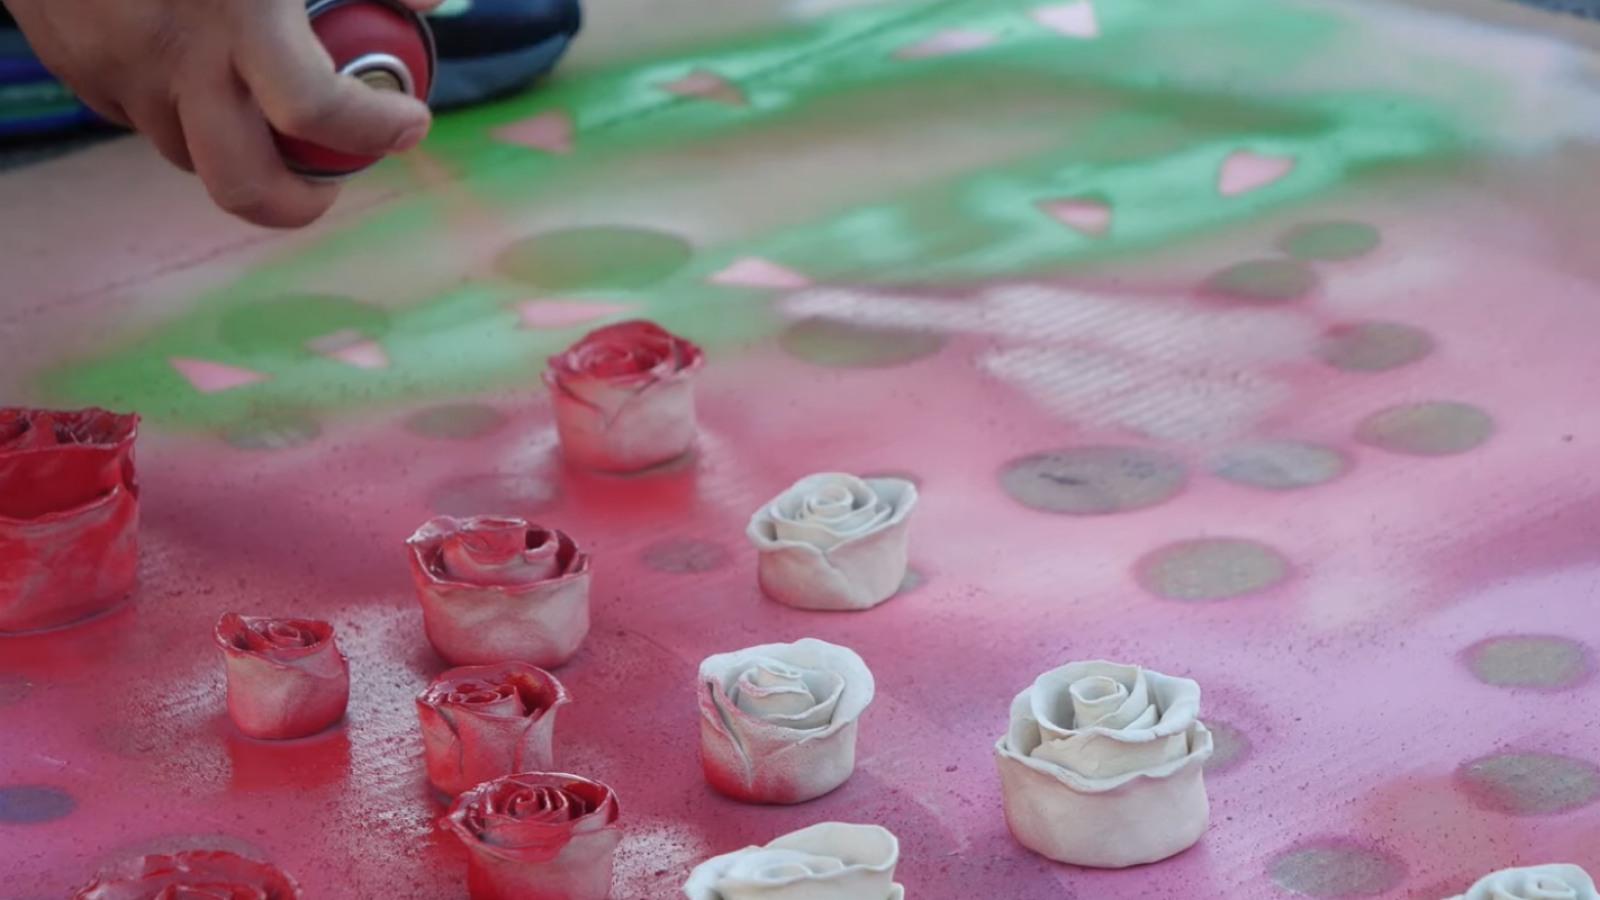 Still image of artist Patrick Martinez working on spray painting sculptural roses taken from Art Encounter studio visit educational video series available on Kleefeld Contemporary YouTube